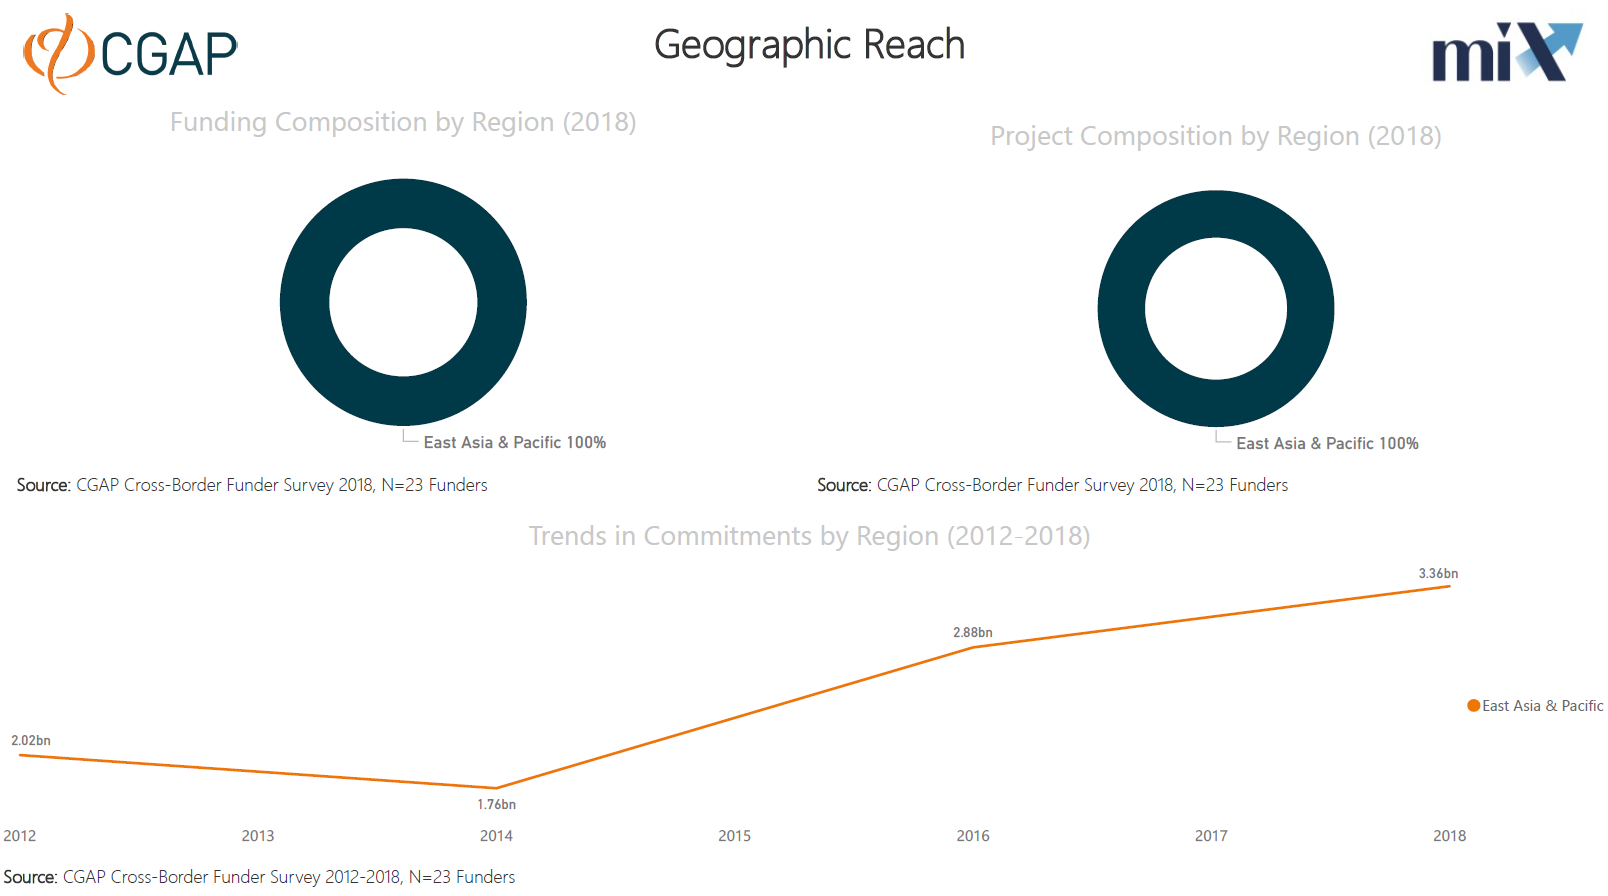 What is the geographic reach?